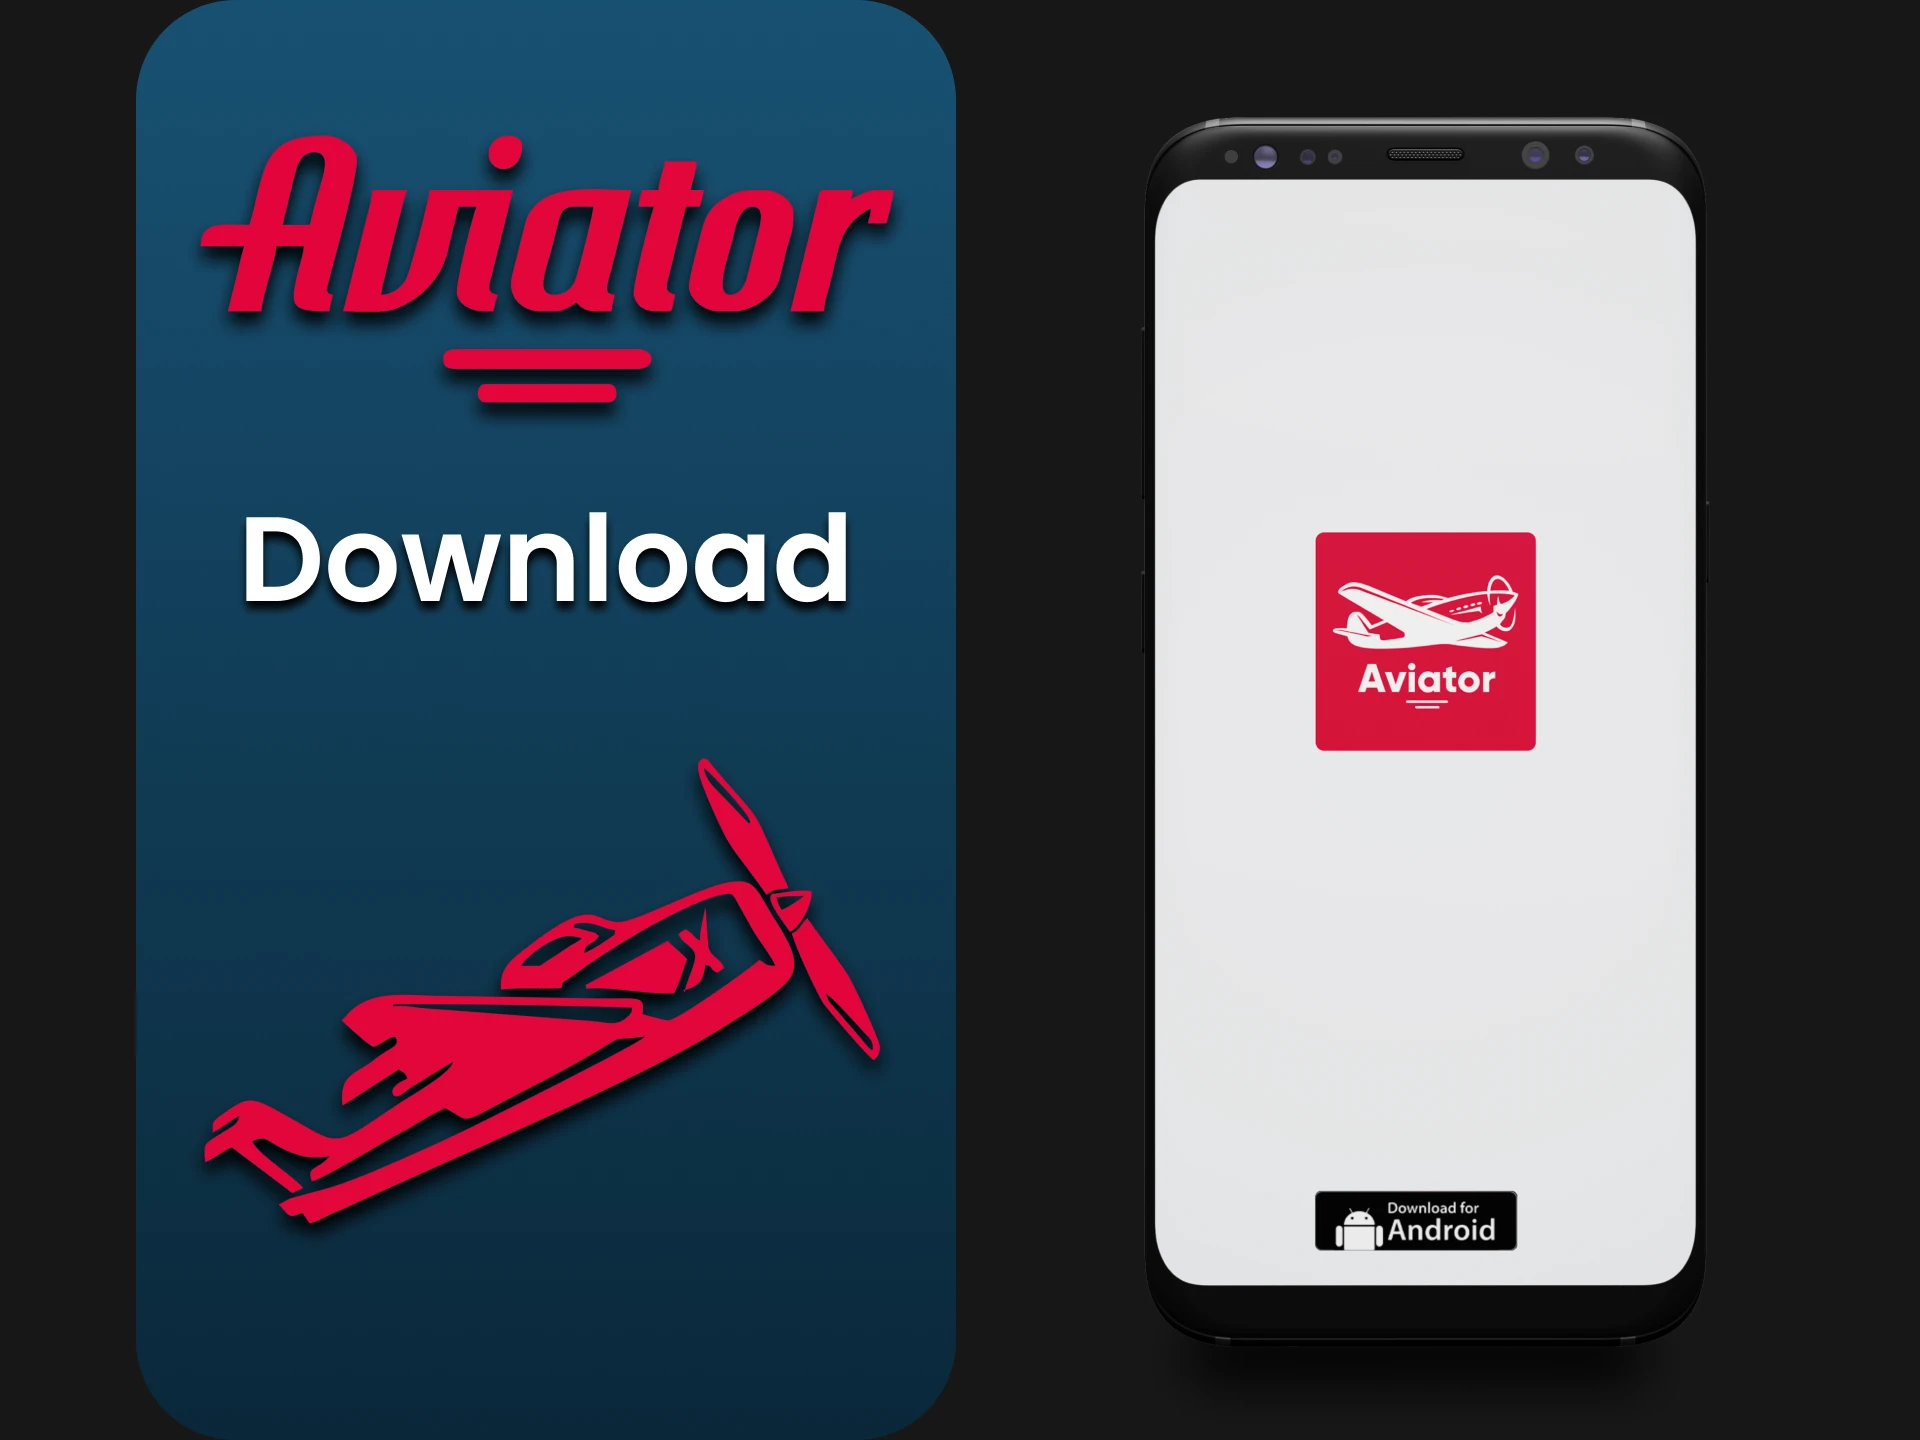 We will show you how to download the application for playing Aviator.